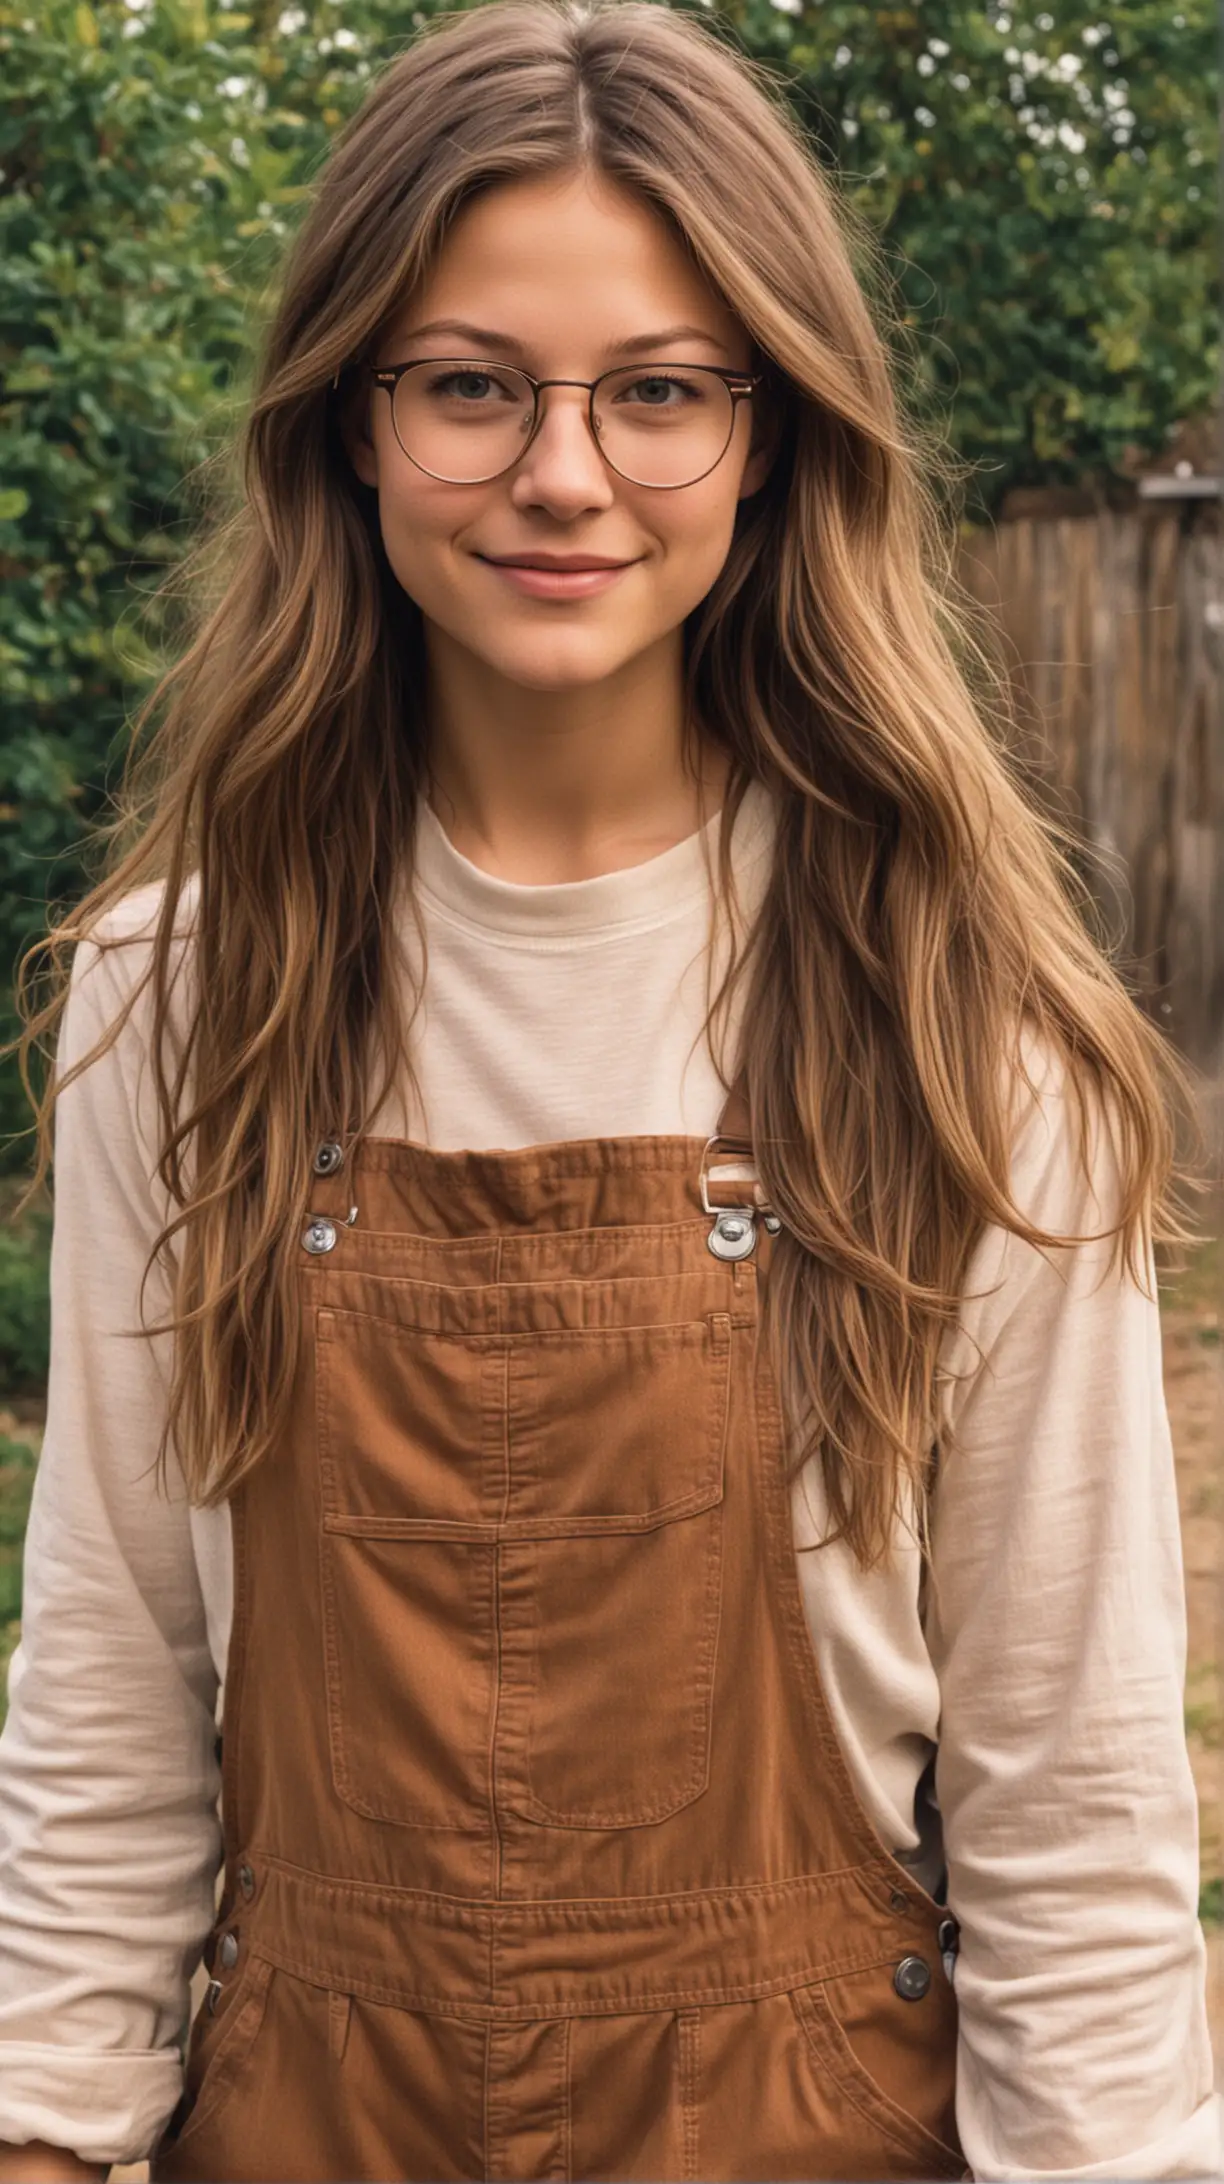 20-year-old Melissa Benoist with long hair. Wearing glasses, brown and dirty overalls in 1980s, Stranger Things